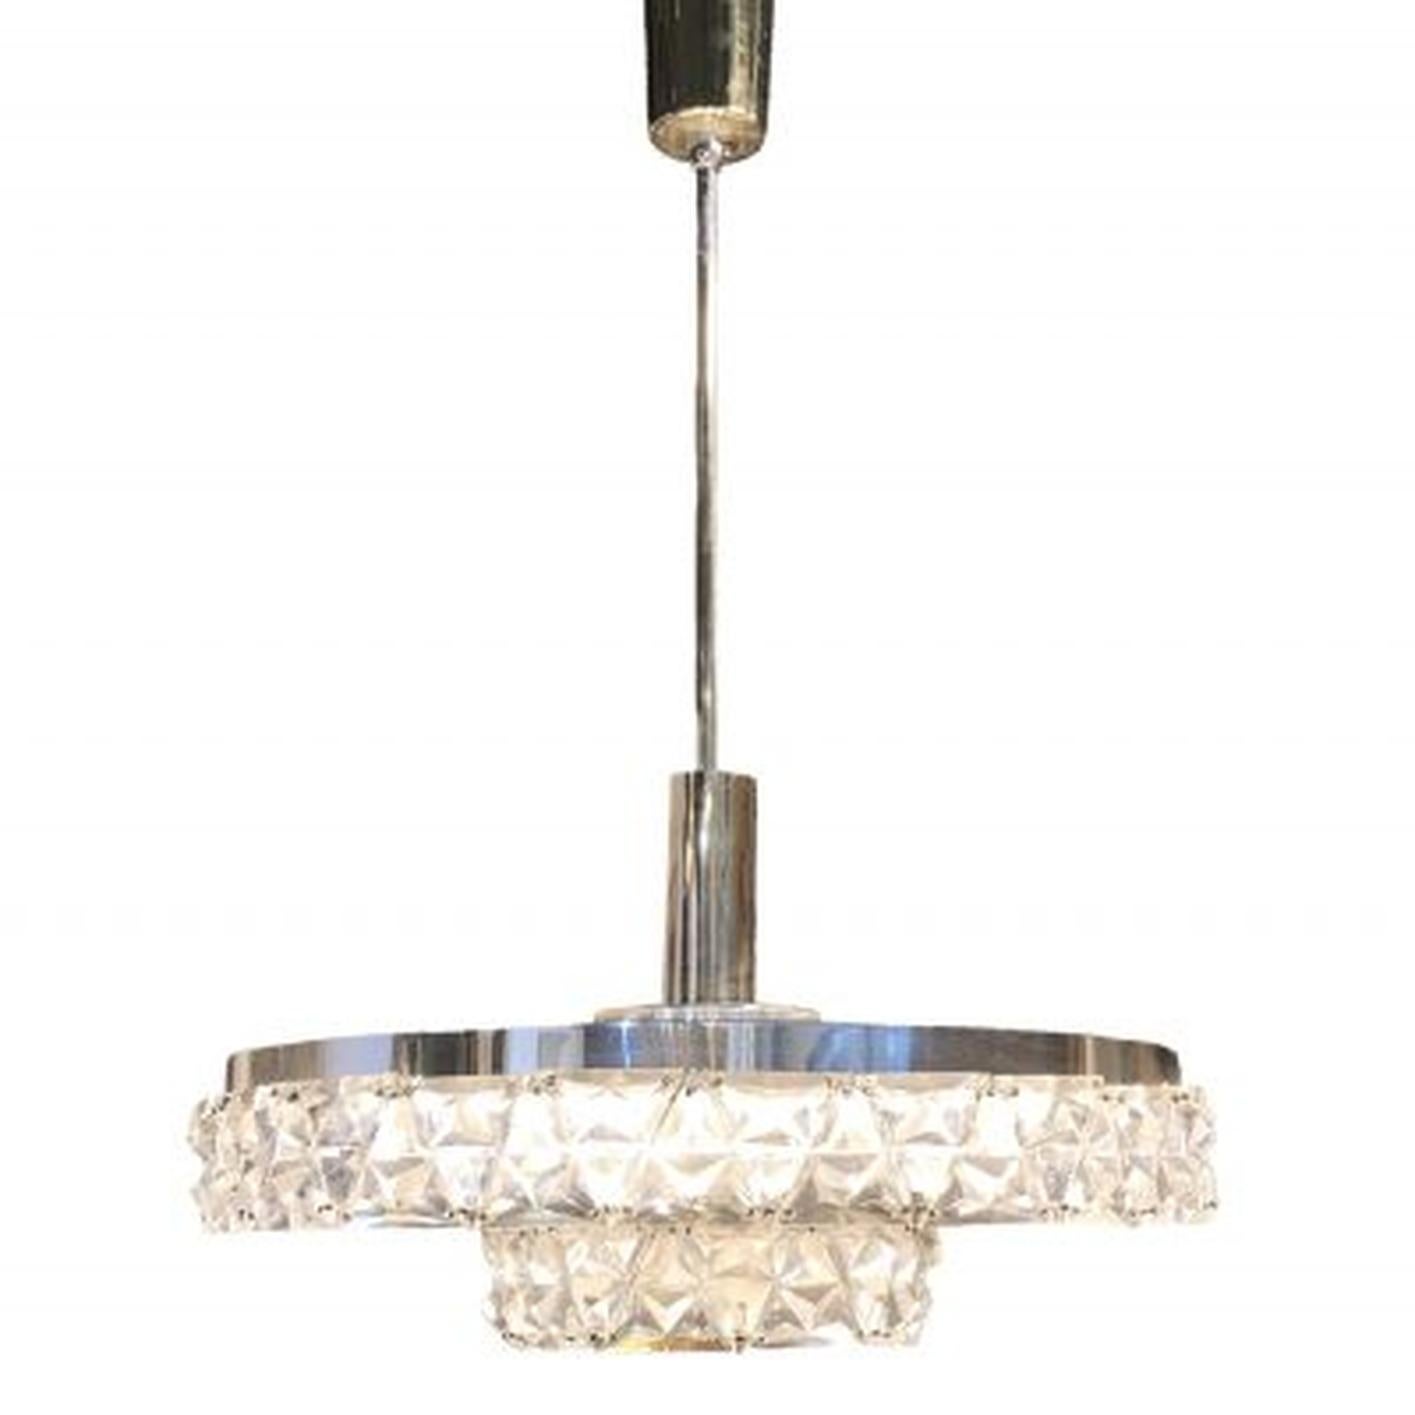 A round, vintage Mid-Century Modern Swedish ceiling light, lamp made of a chrome, brass frame and hand blown Orrefors glass, featuring a four light socket. The Scandinavian chandelier, pendant was designed by Carl Fagerlund and produced by Orrefors